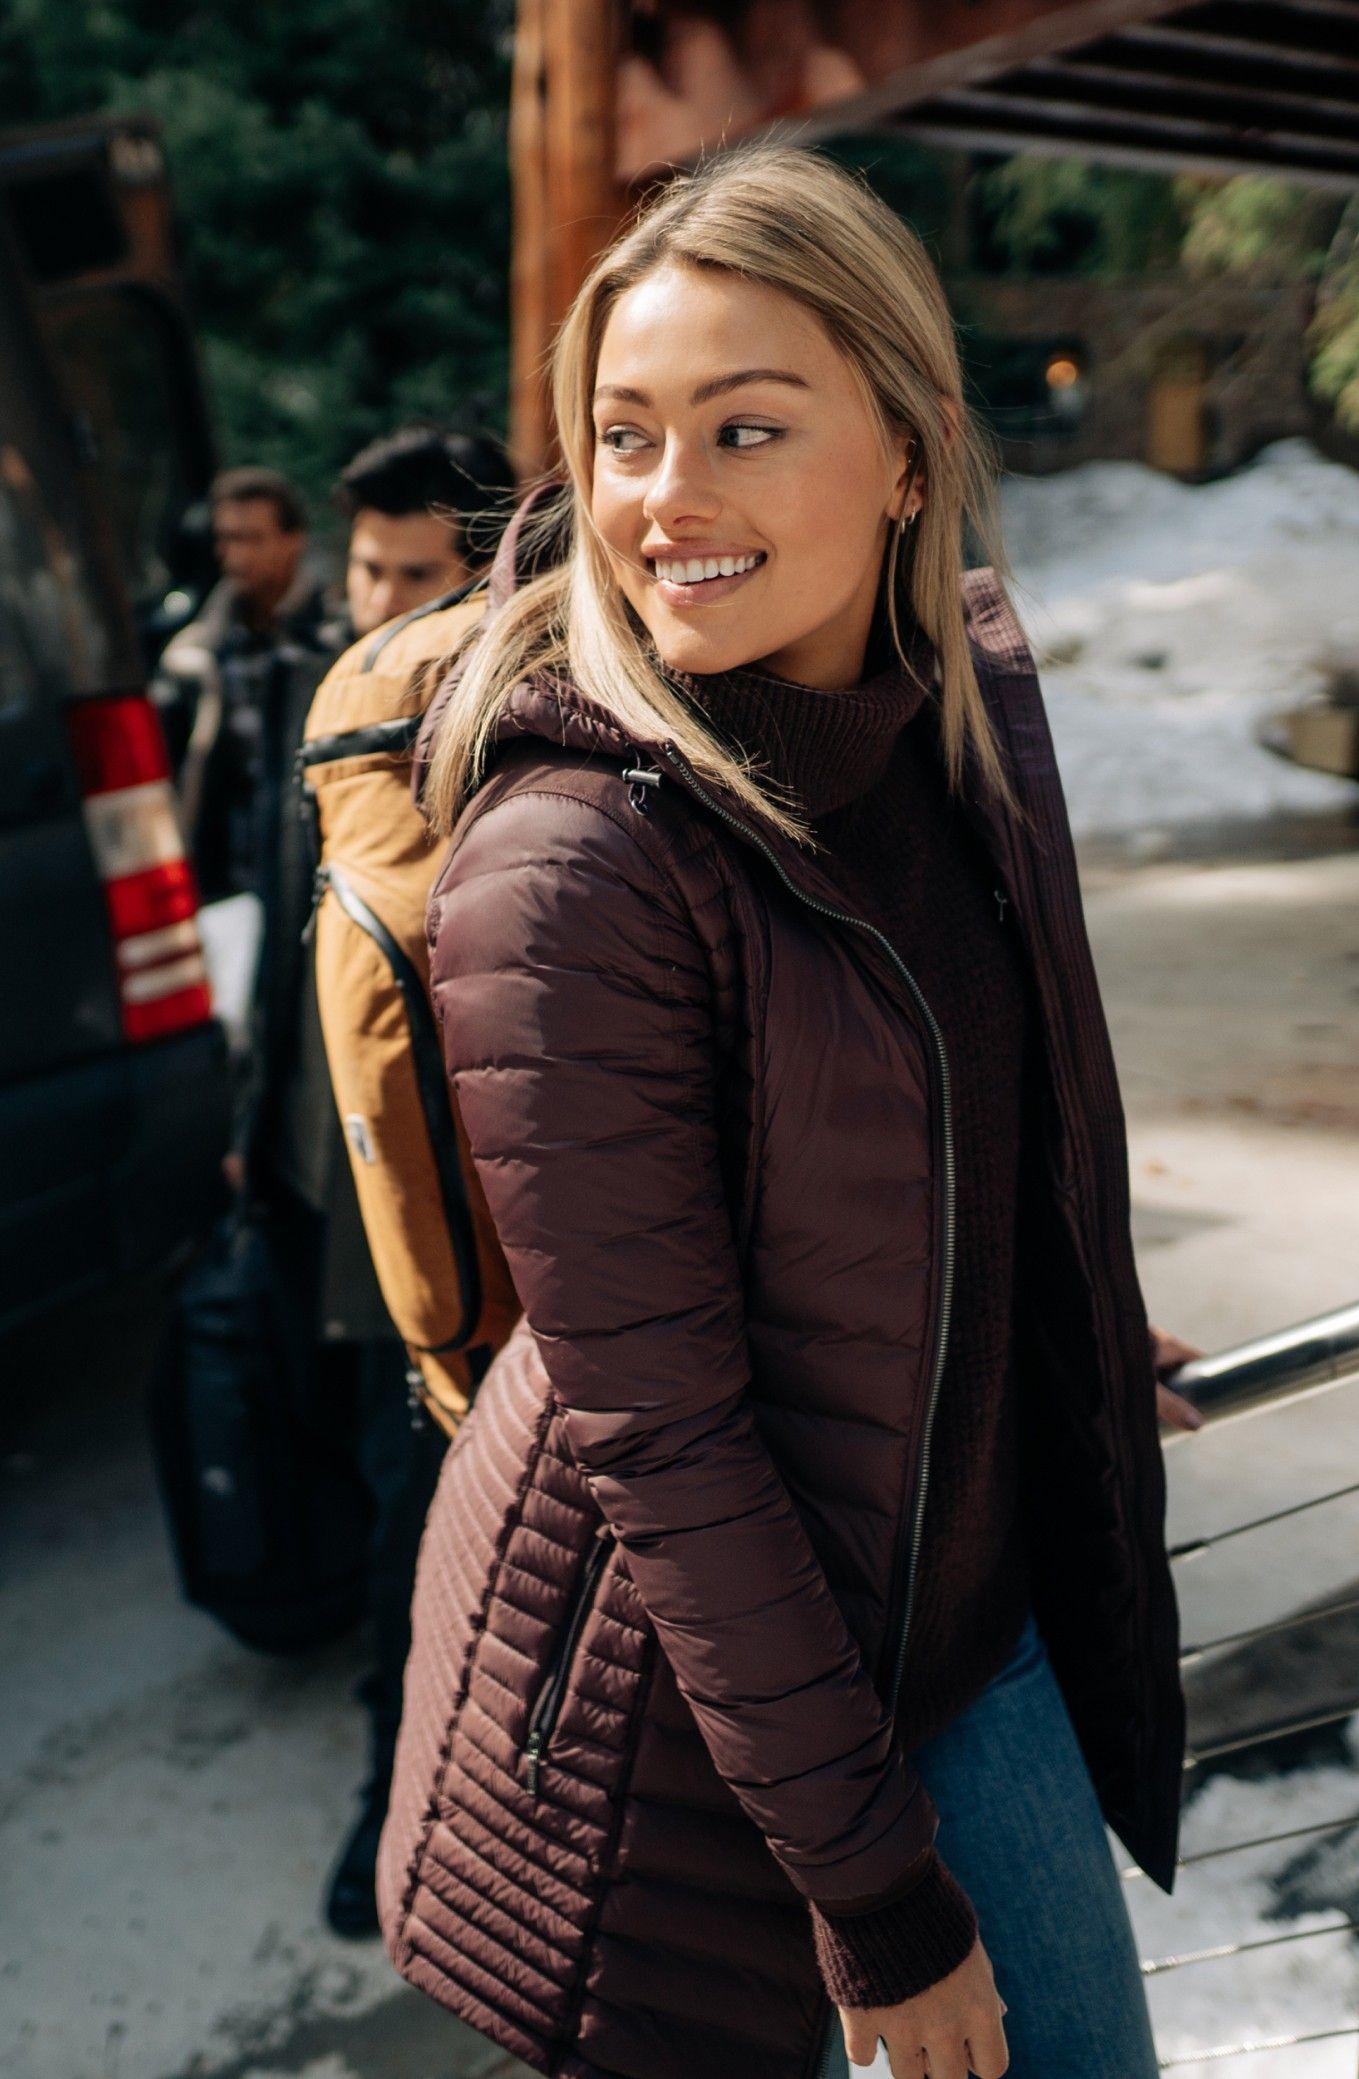 Woman wearing KUHL jacket and backpack